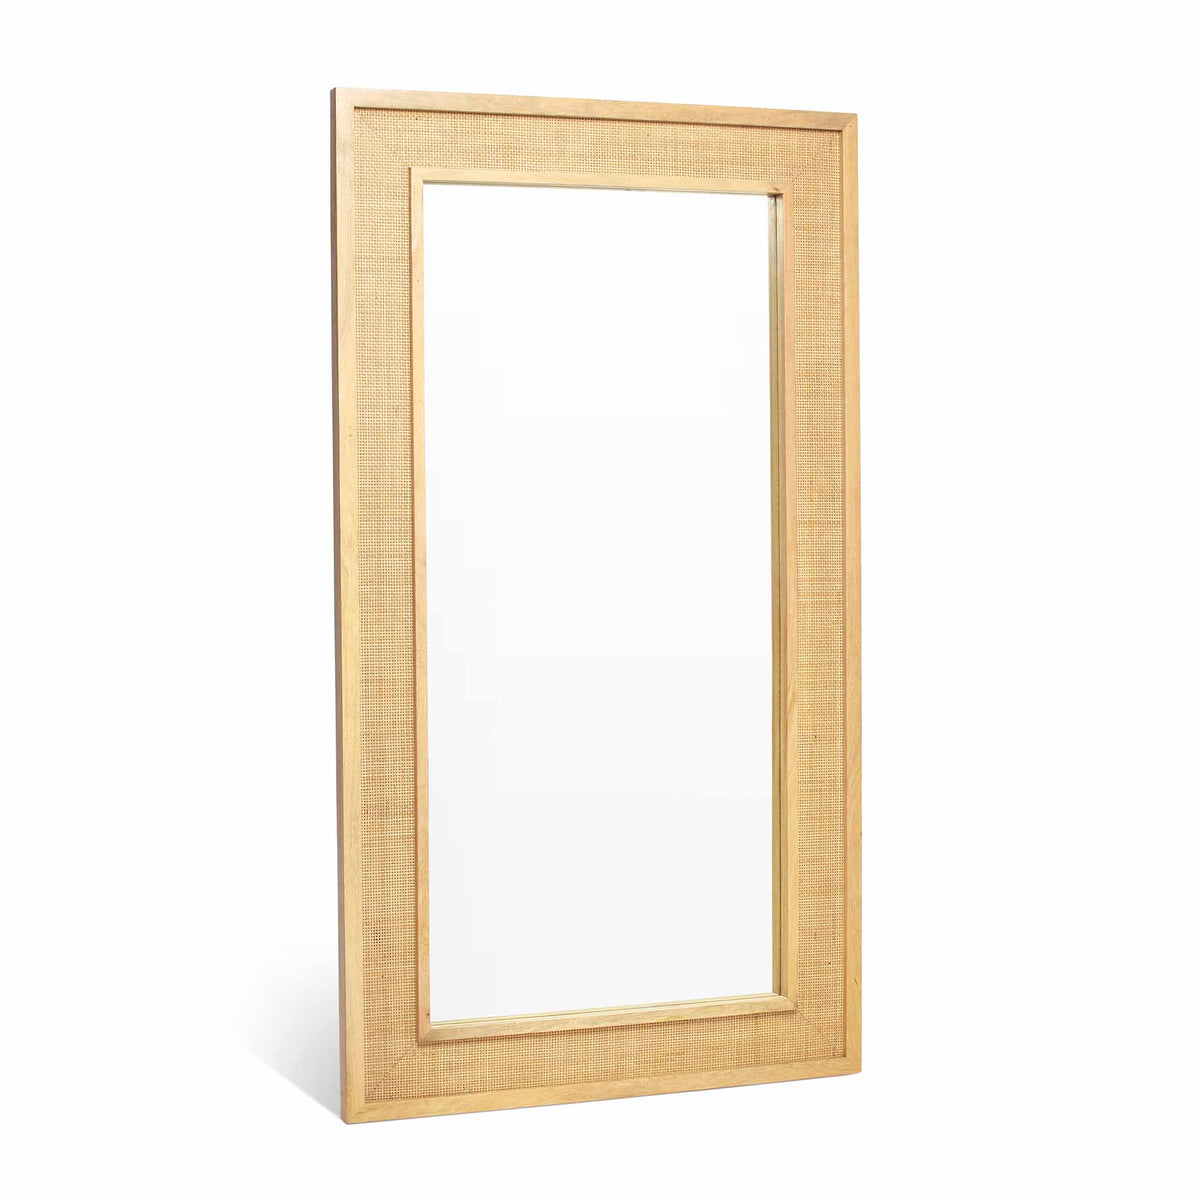 Venti Natural Mango Wood & Cane Large Floor Mirror from Roseland Furniture